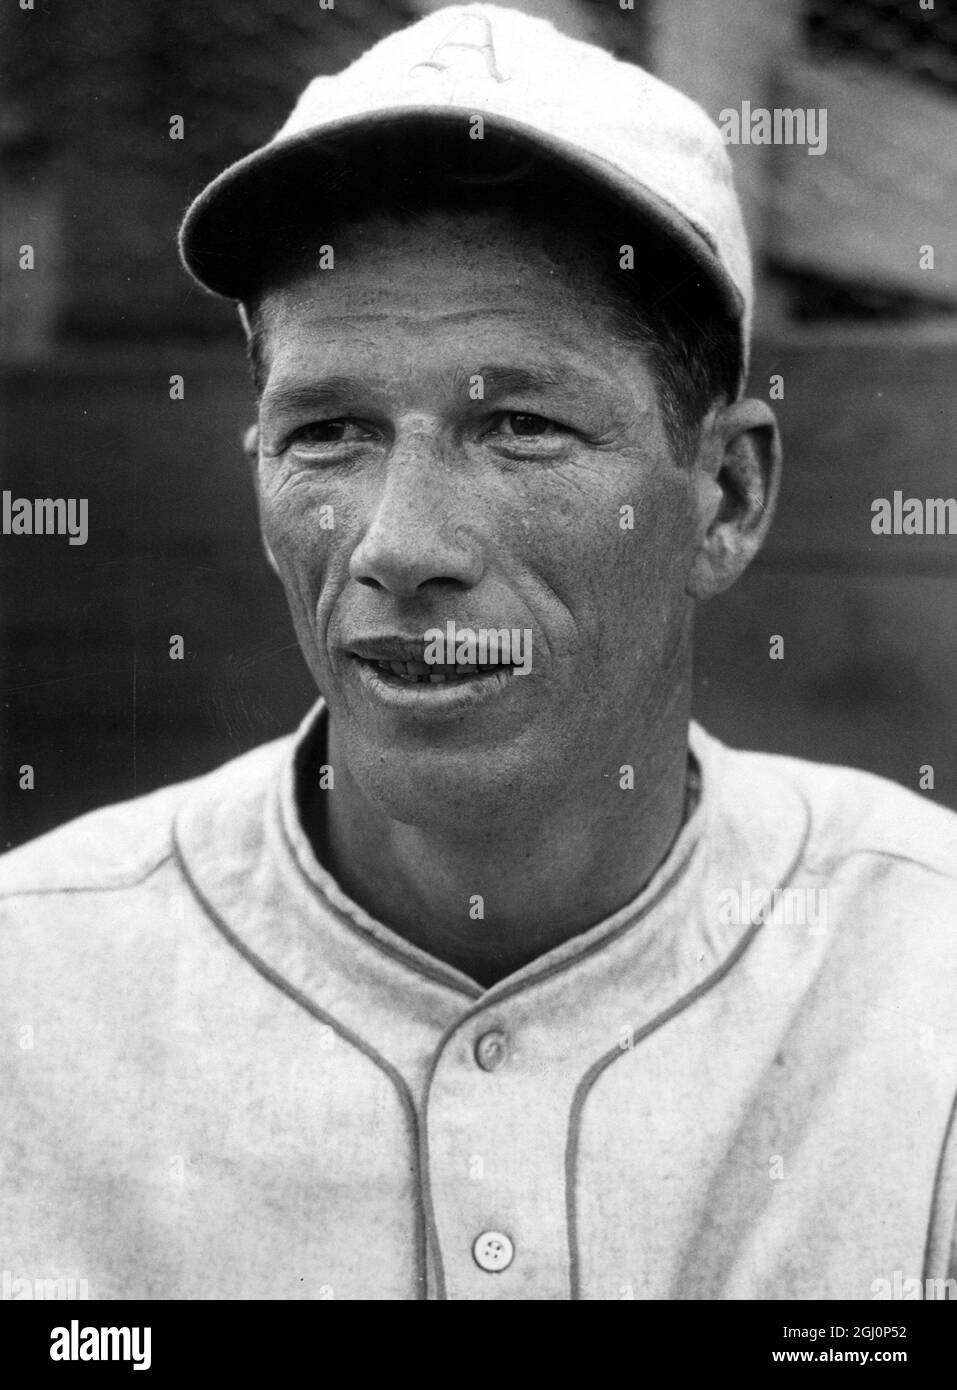 Spring training with the athletics. Robert (Lefty) Grove, star hurler and one of the leading pictures in the American league, at the Spring training camp of the world champion Philadelphia athletics, Fort Myer, Florida. 2 March 1931 Stock Photo